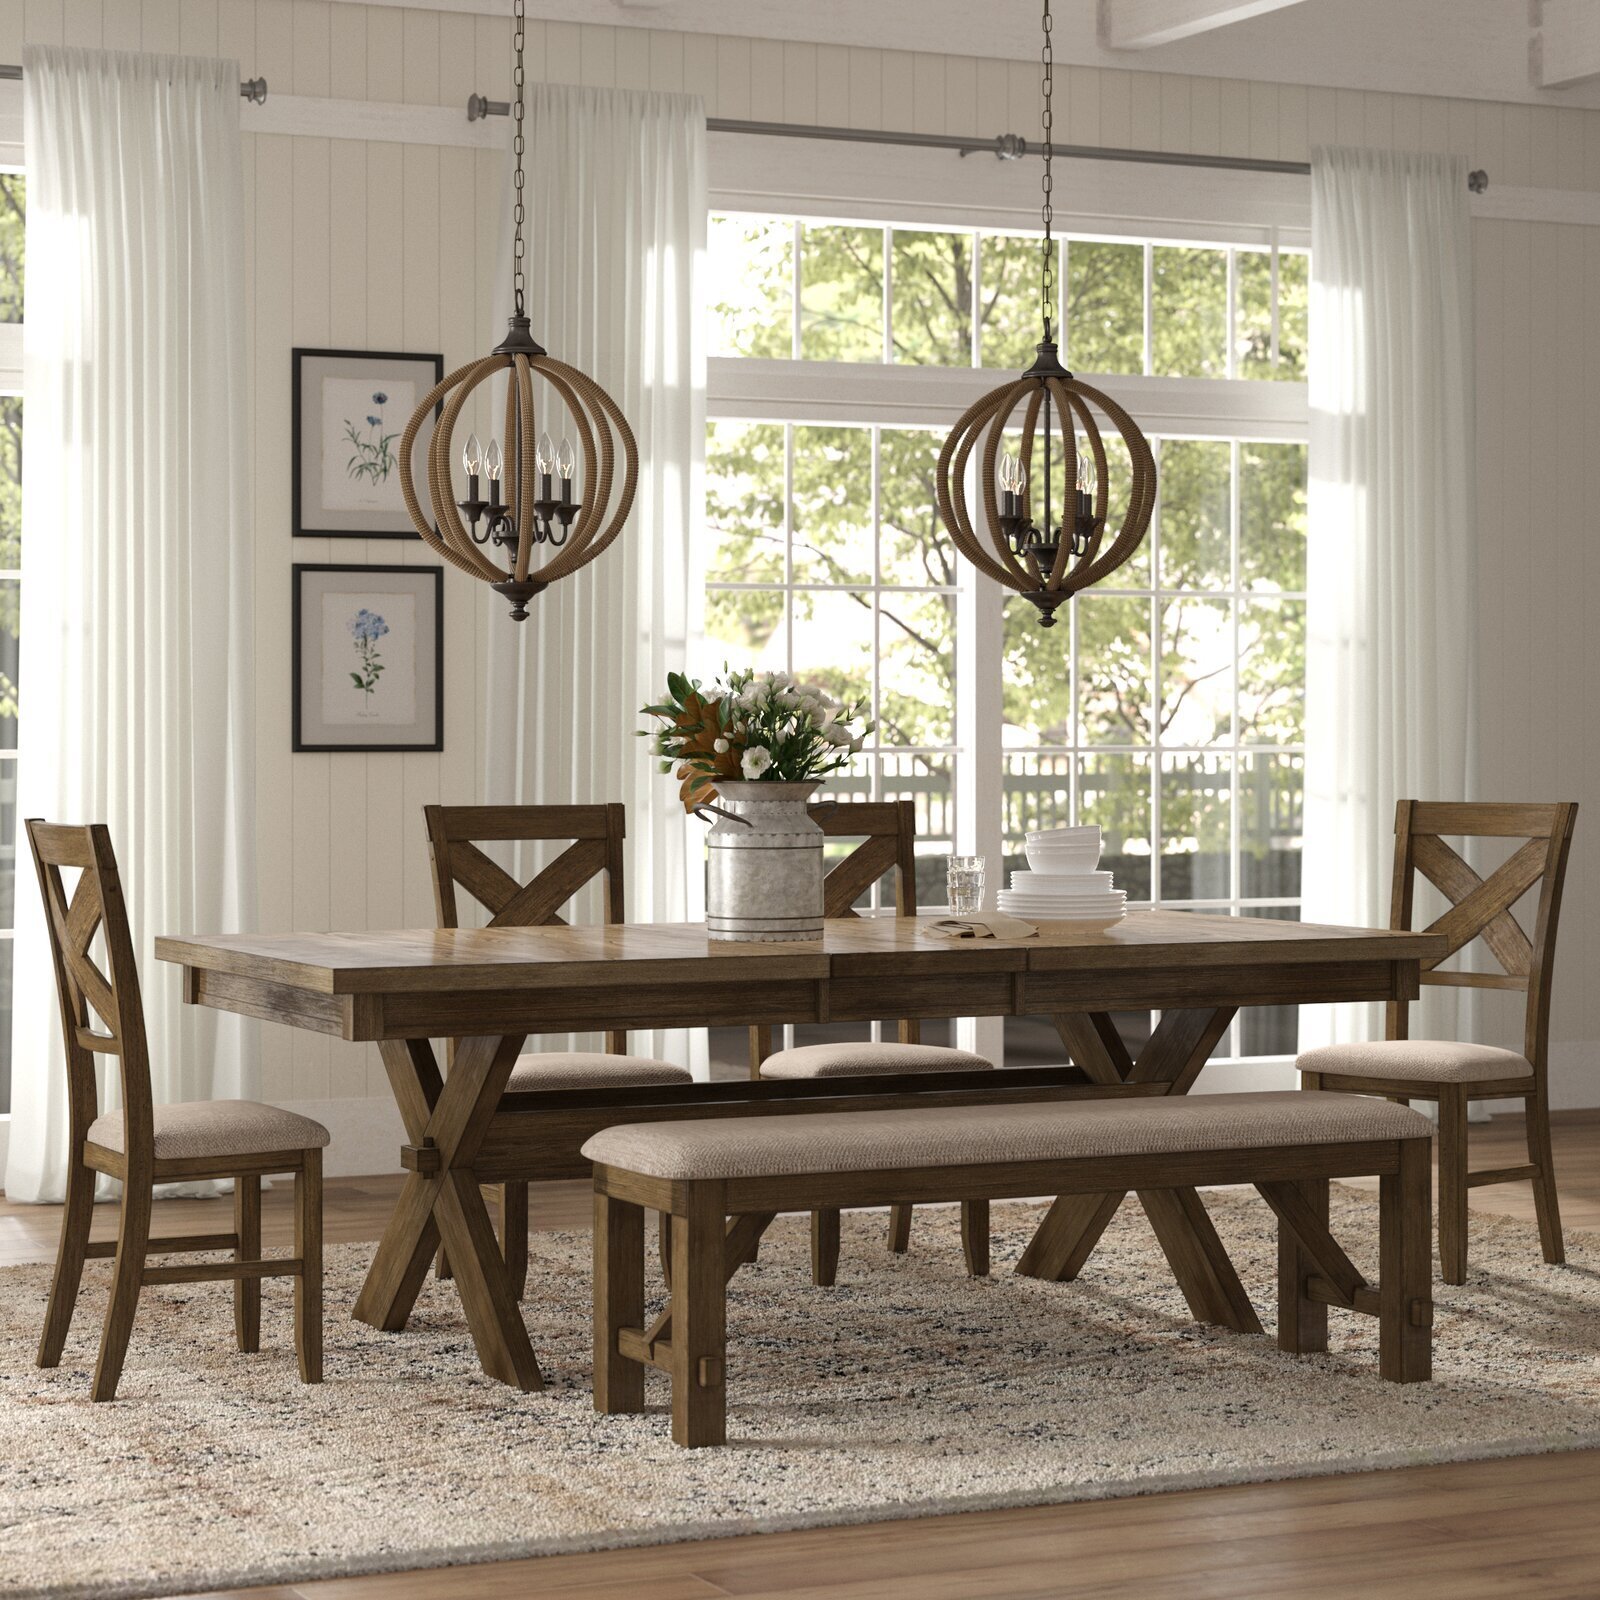 Country Charm Dining Table Chairs and Bench